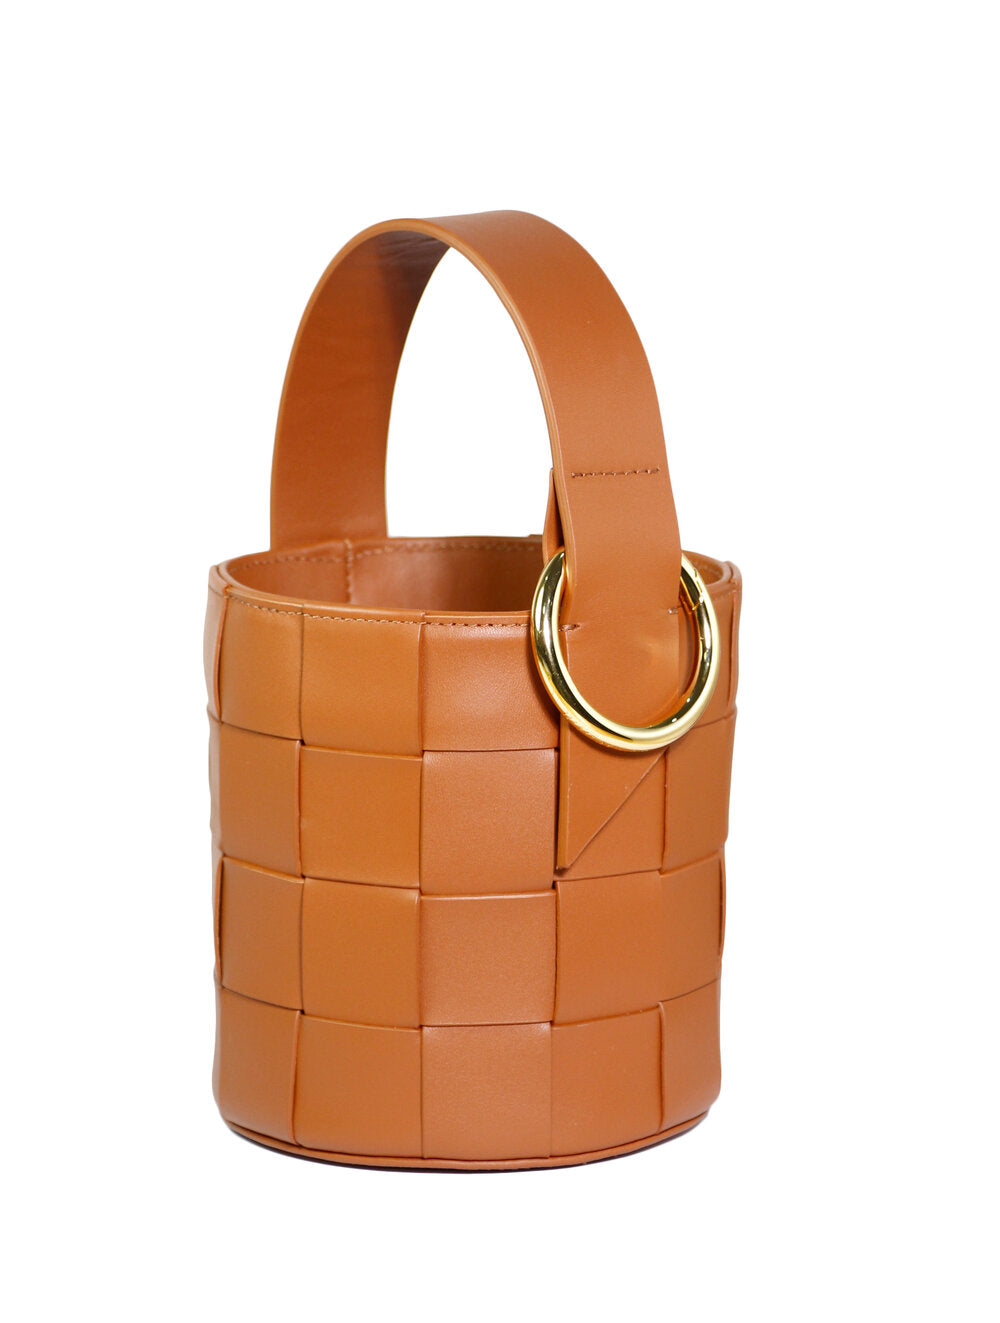 JAS Woven Leather Bucket In Classic Tan